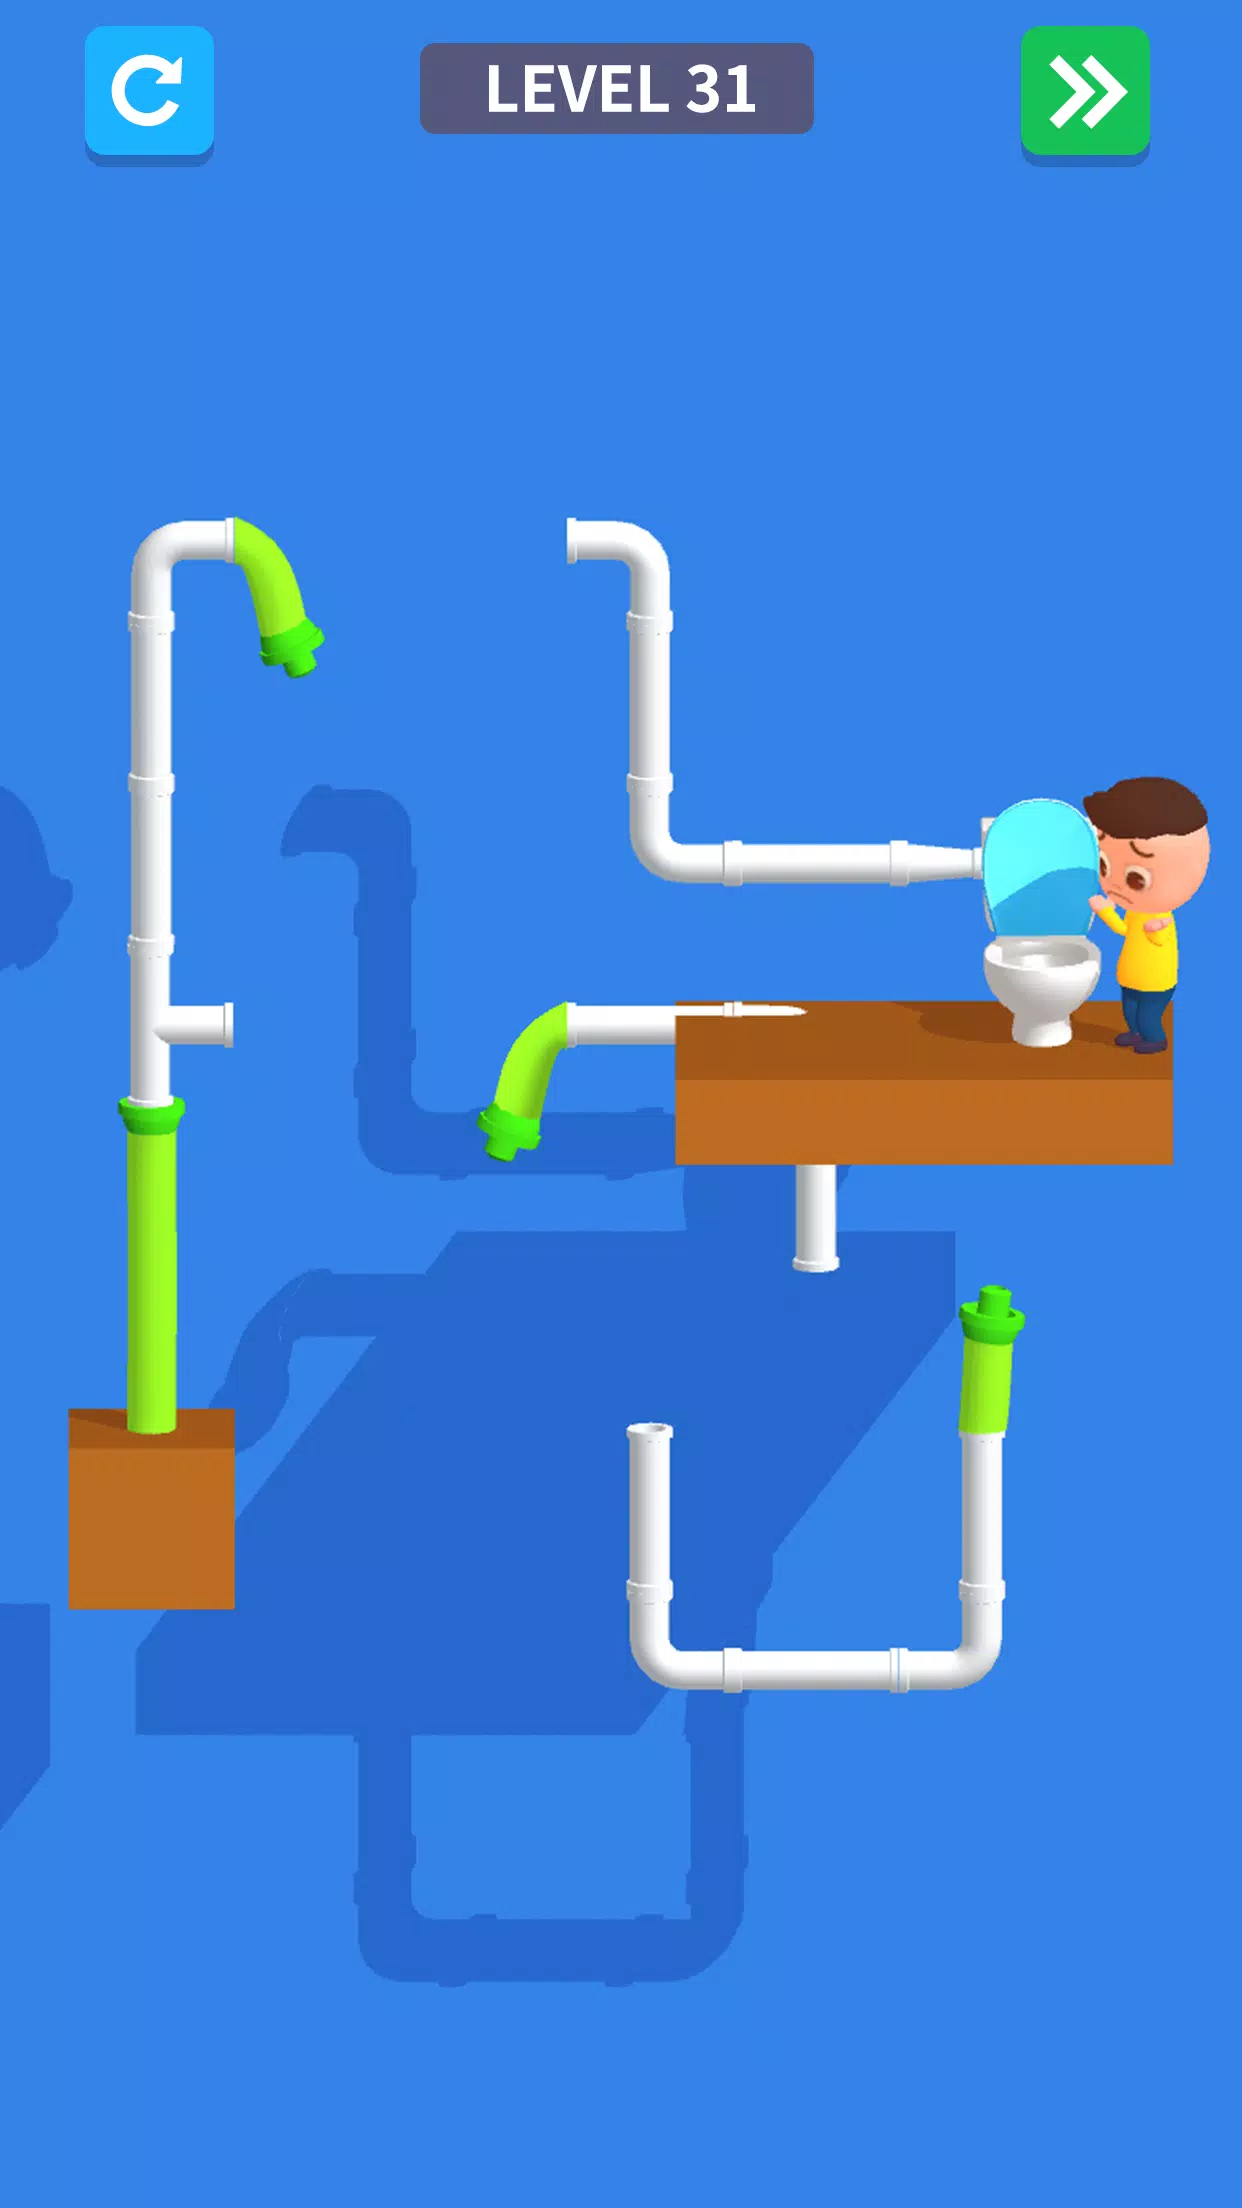 Go to the toilet - funny game Apk Download for Android- Latest version 1.3-  com.tygame.game44